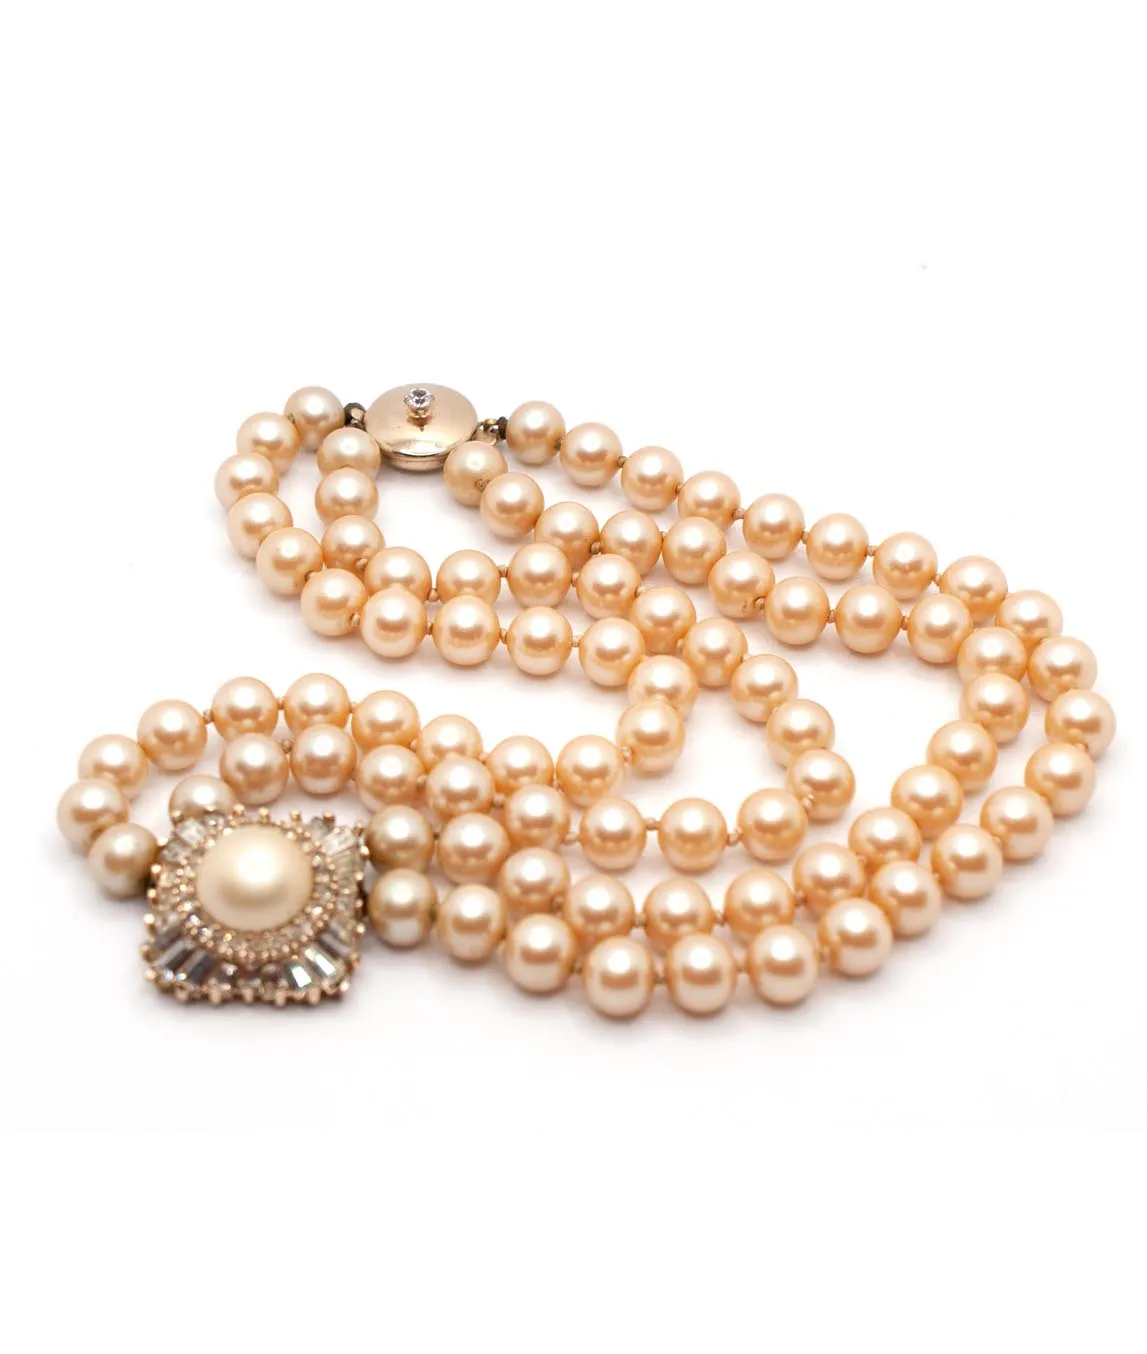 Panetta two strand faux pearl necklace with champagne beads